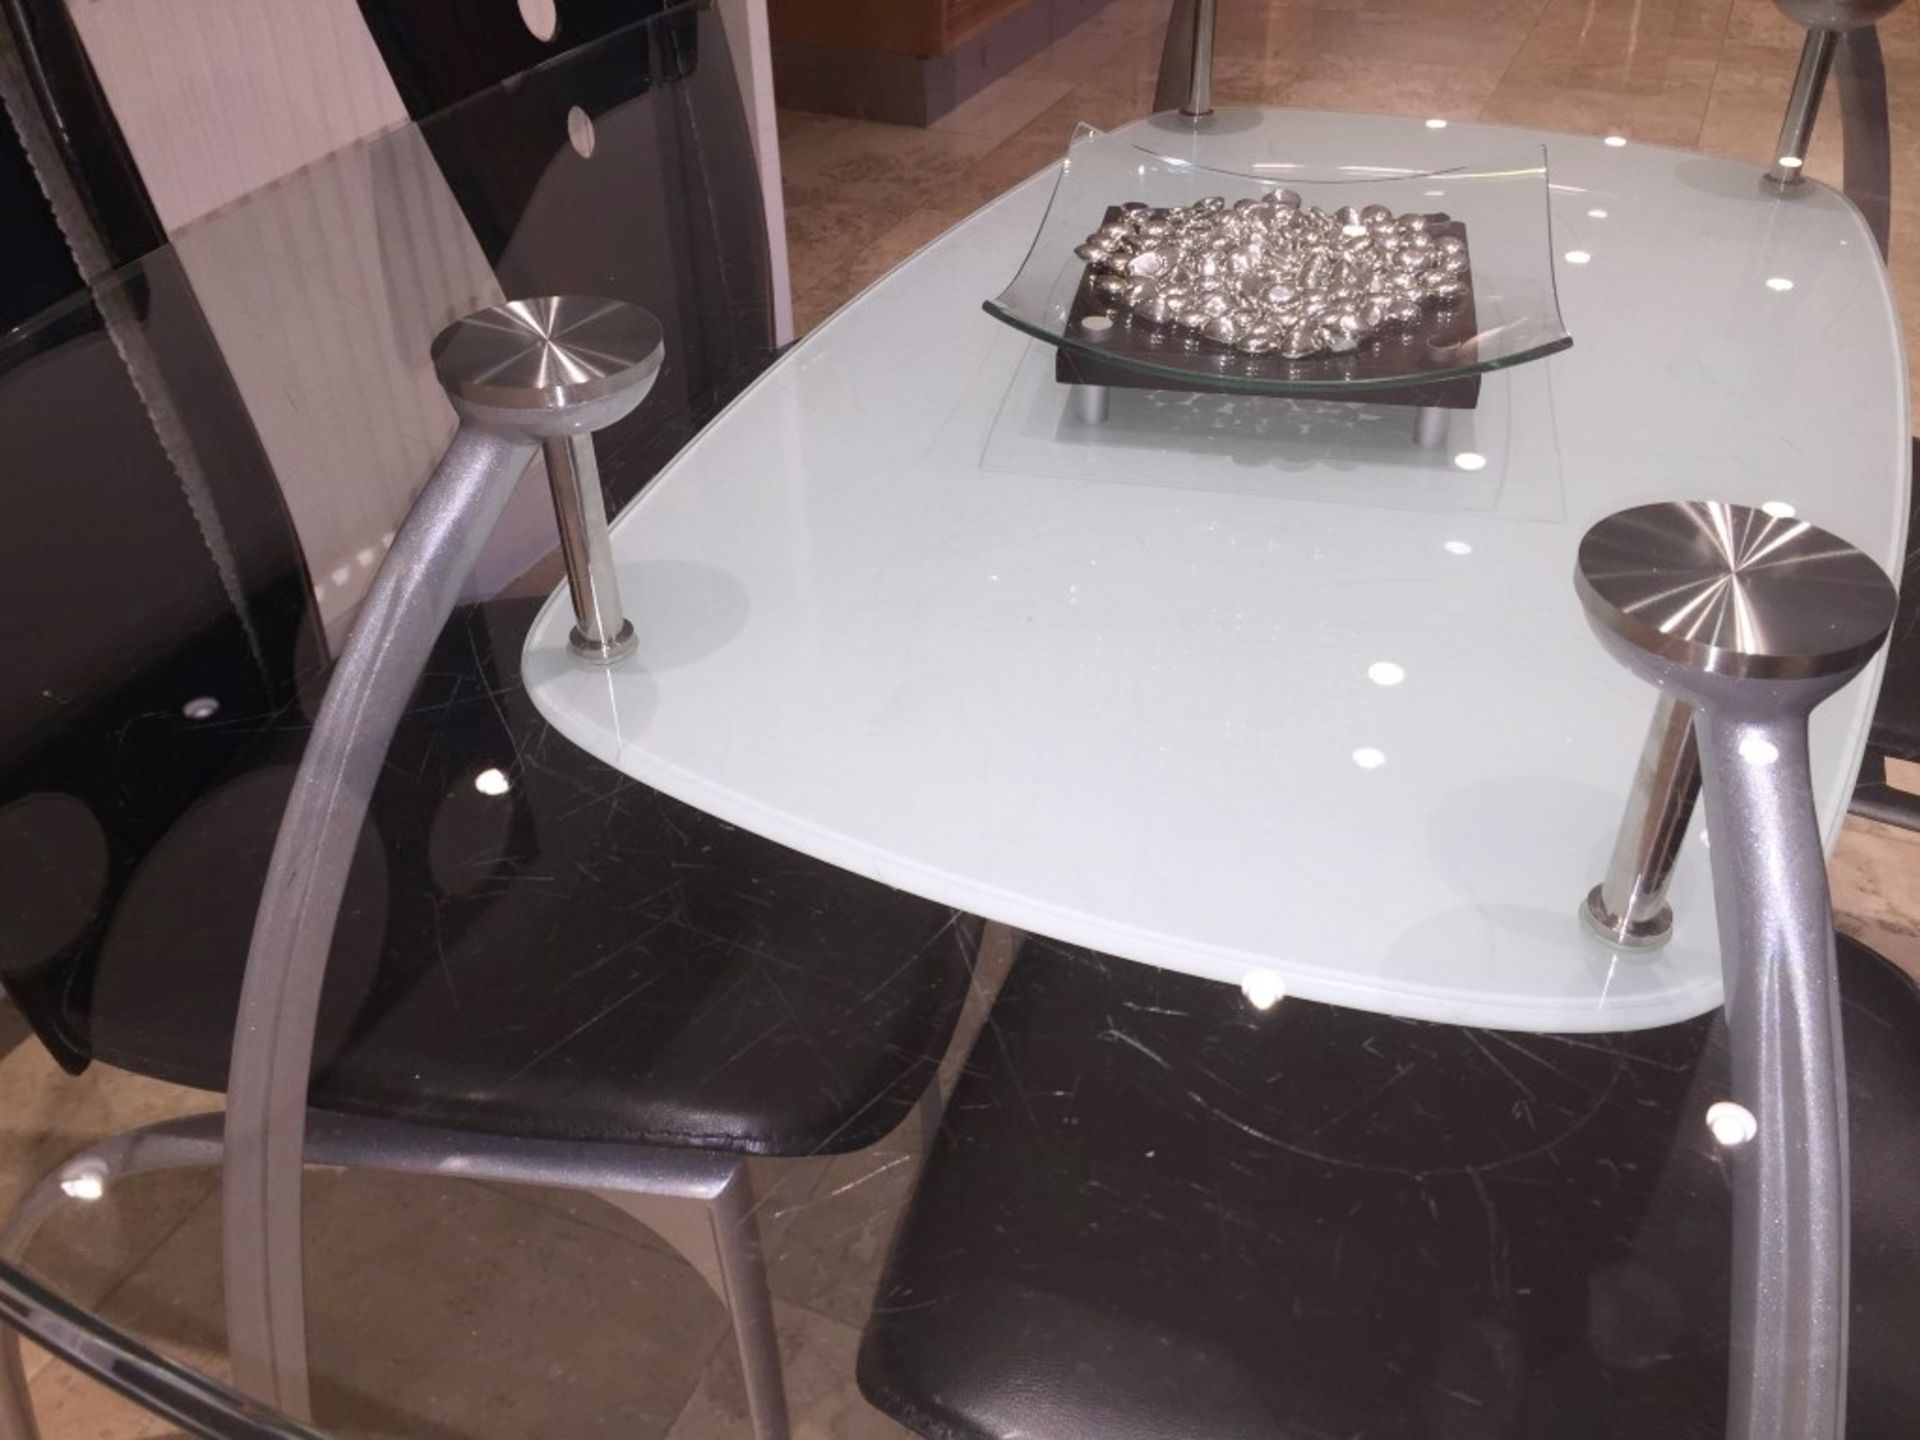 1 x Designer Glass-topped Dining Table And Chairs - Dimensions: 150cm x 84cm x Height 75cm Pls 4 - Image 2 of 5